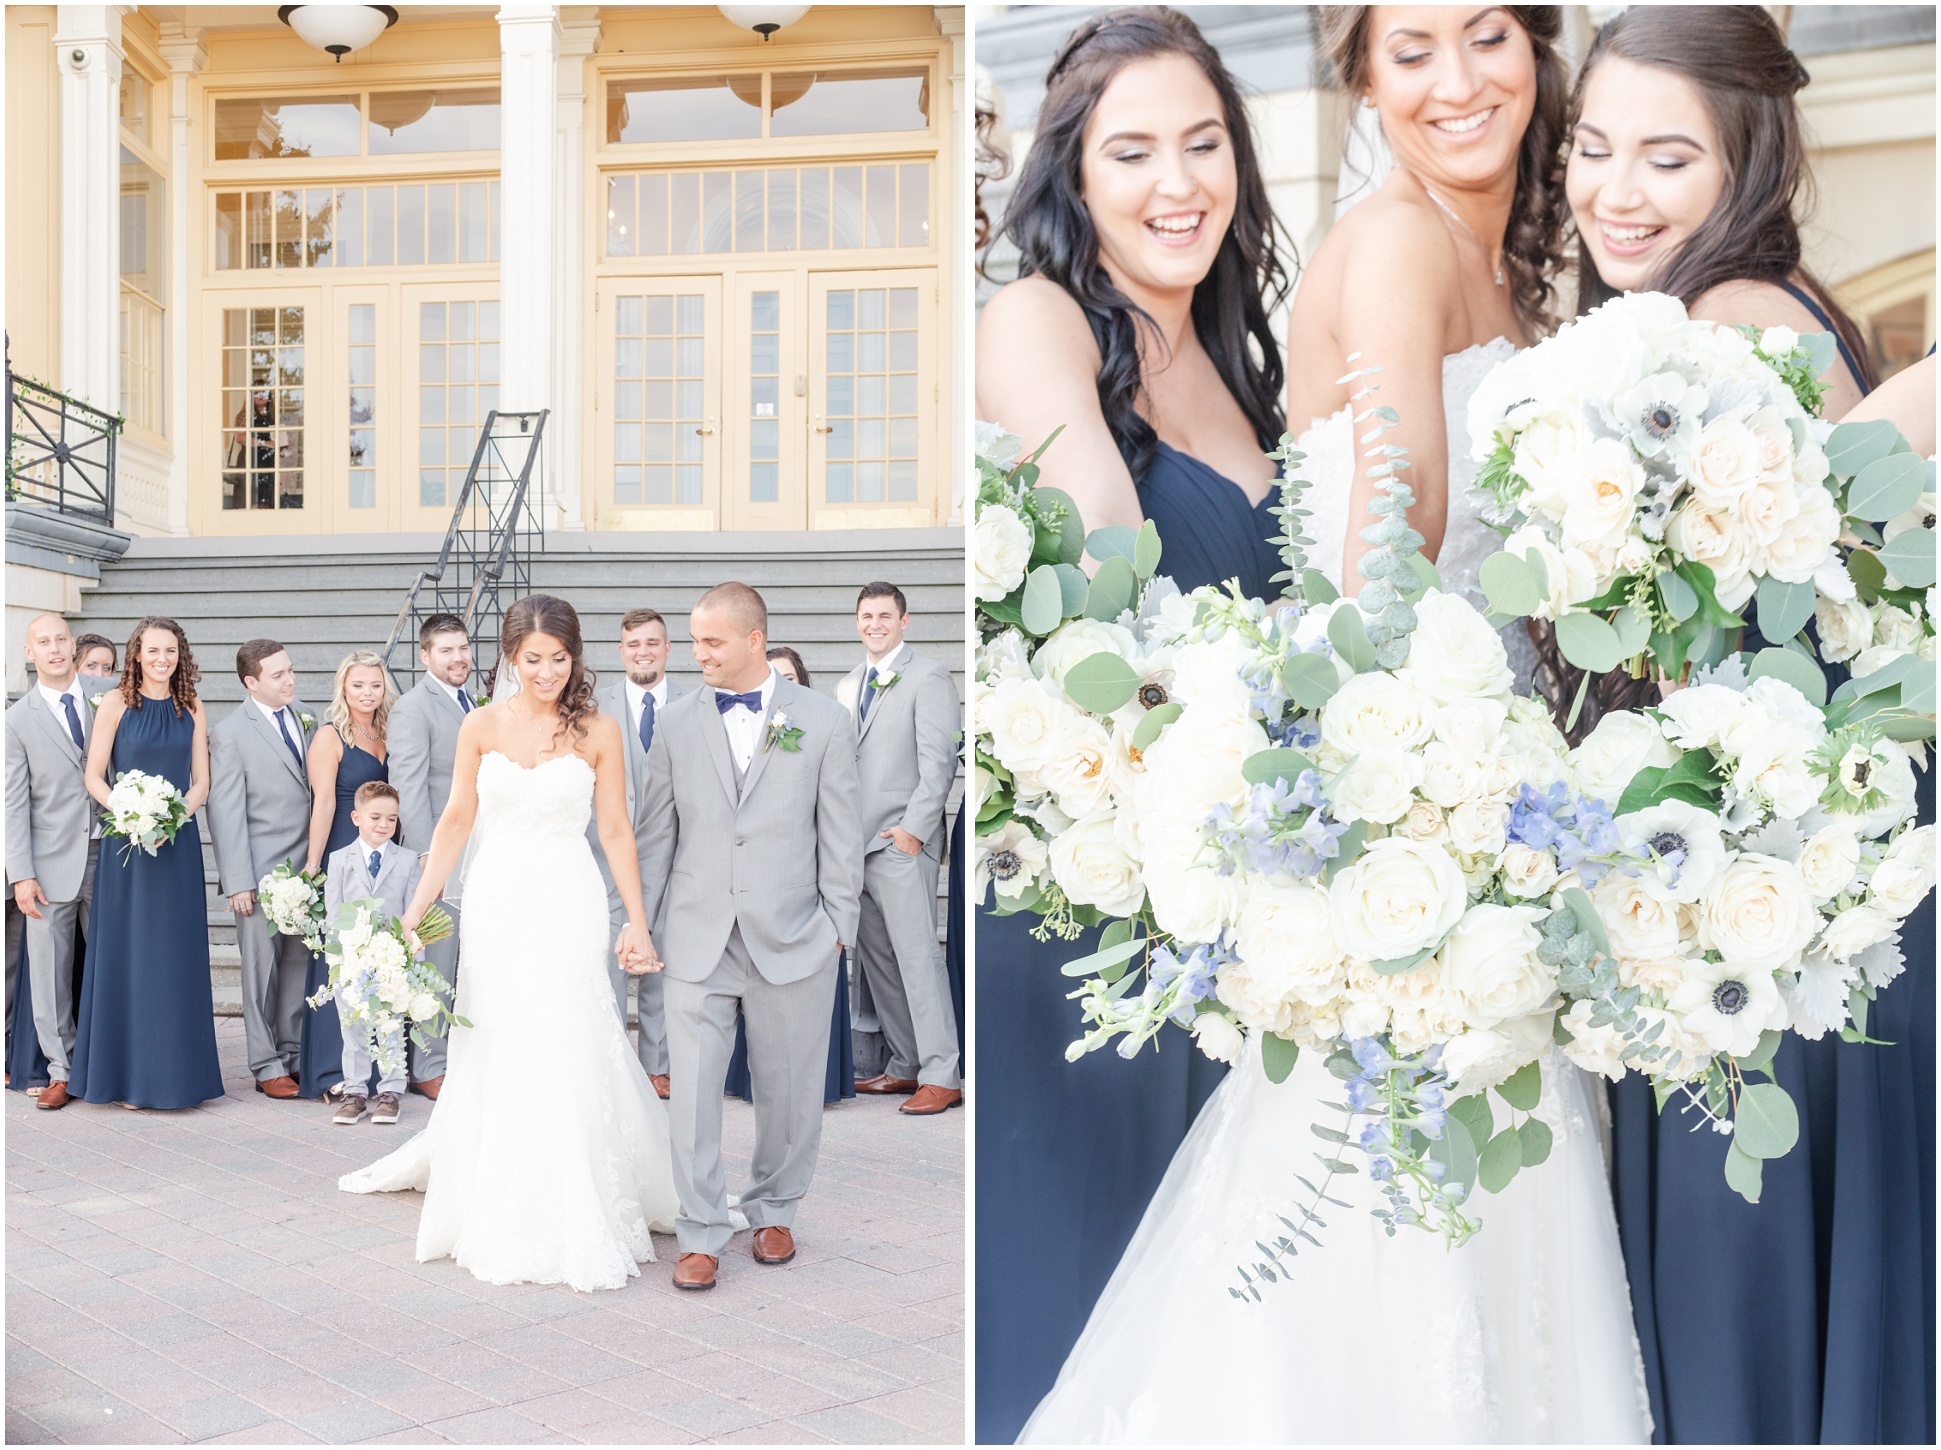 Two images of the Heaps couple with their bridal party at the Maryland Zoo